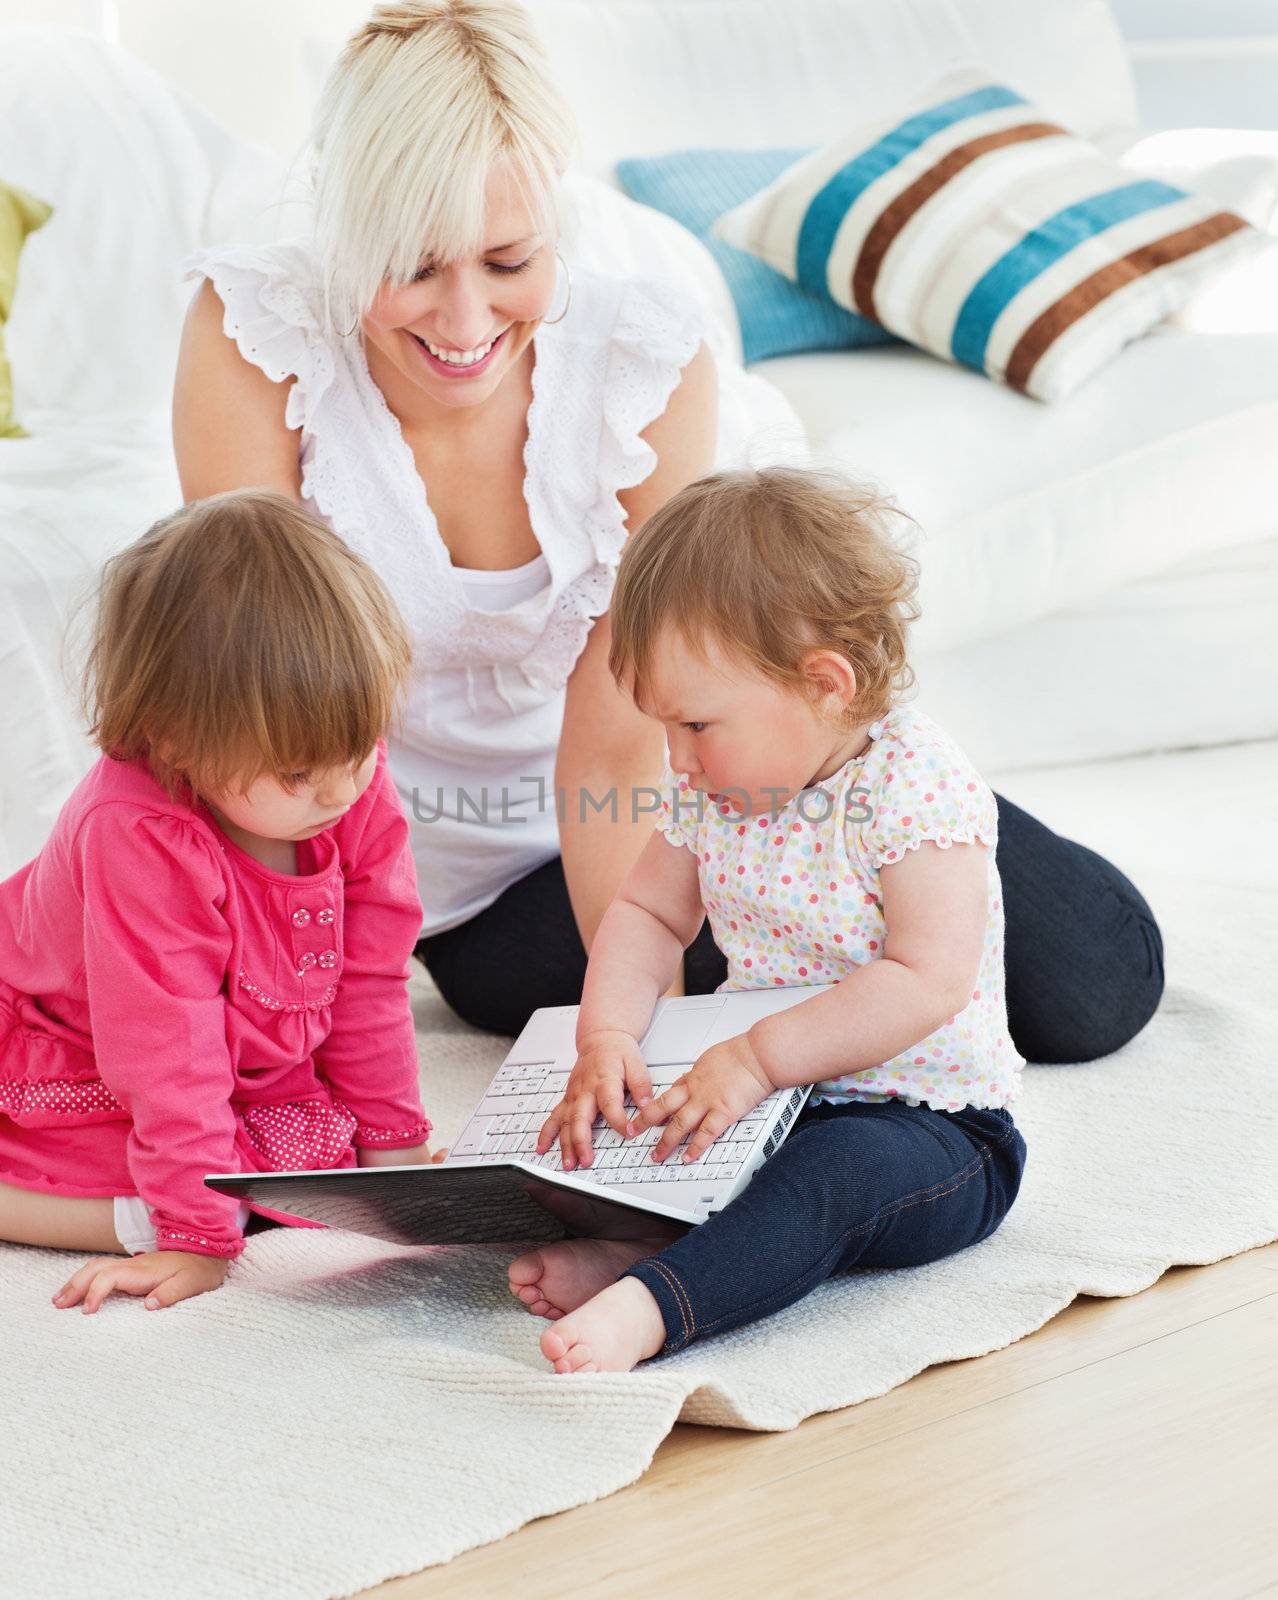 Pretty woman working with her children at laptop by Wavebreakmedia